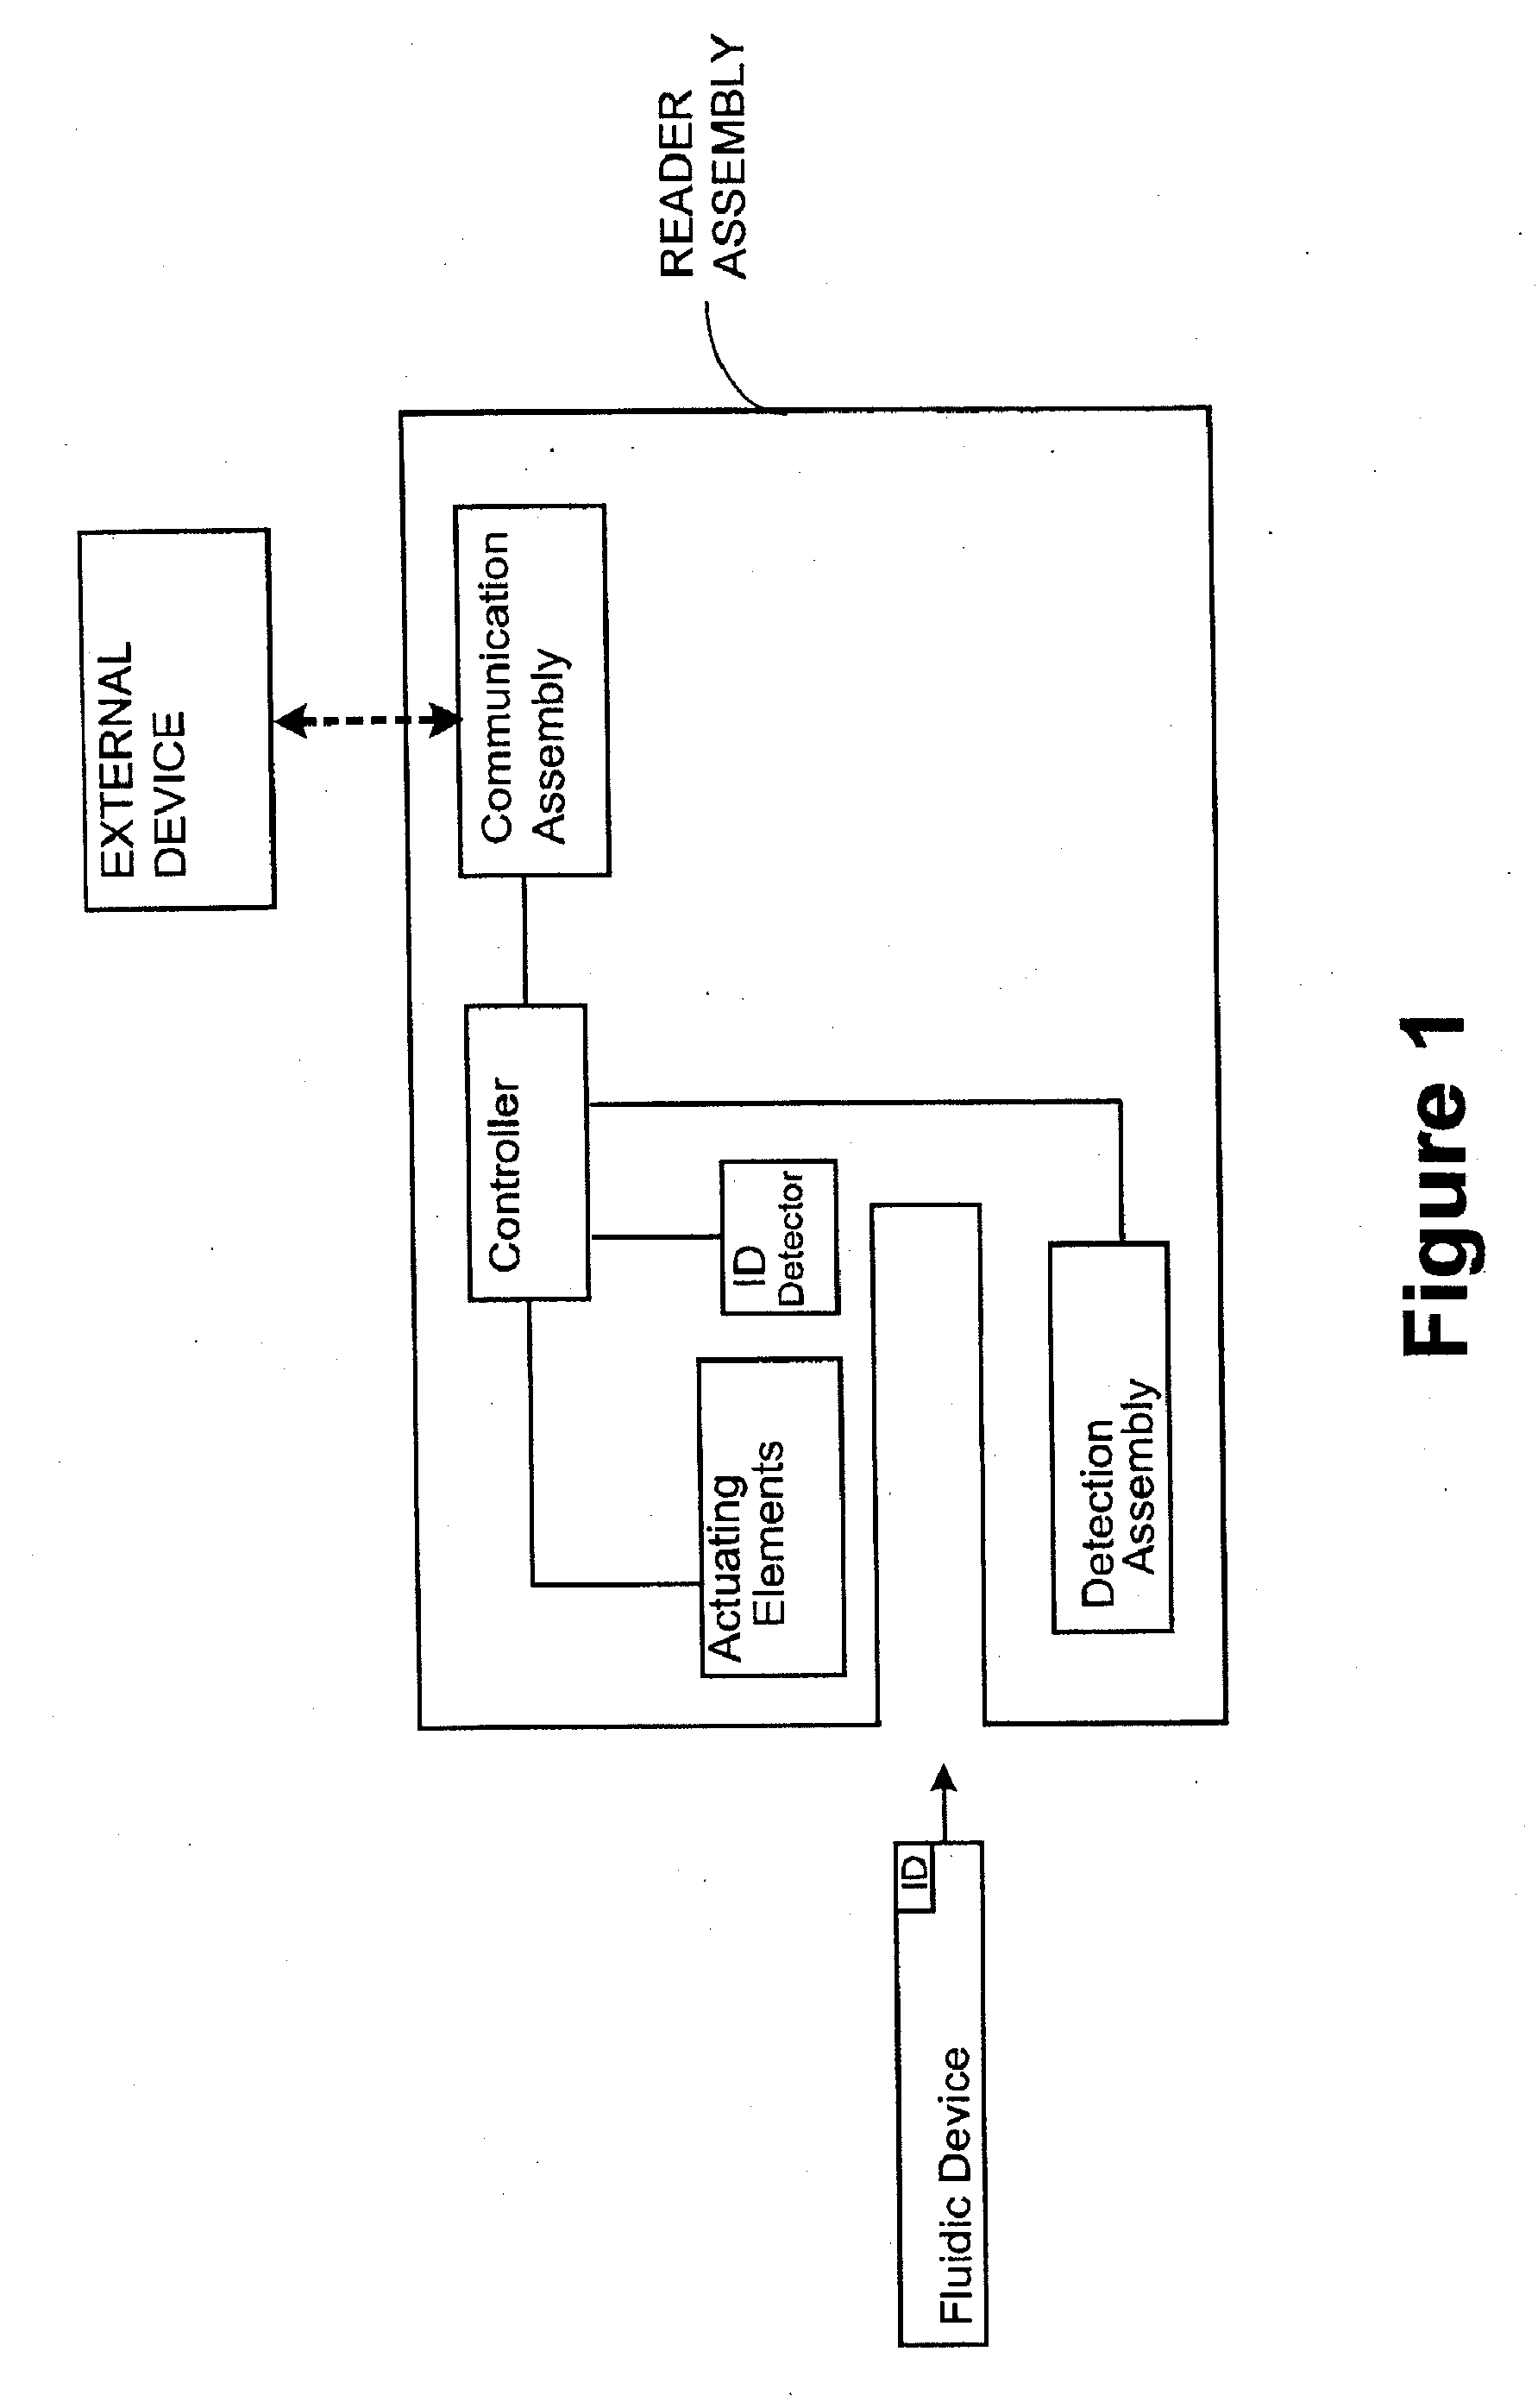 Systems and Methods of Sample Processing and Fluid Control in a Fluidic System